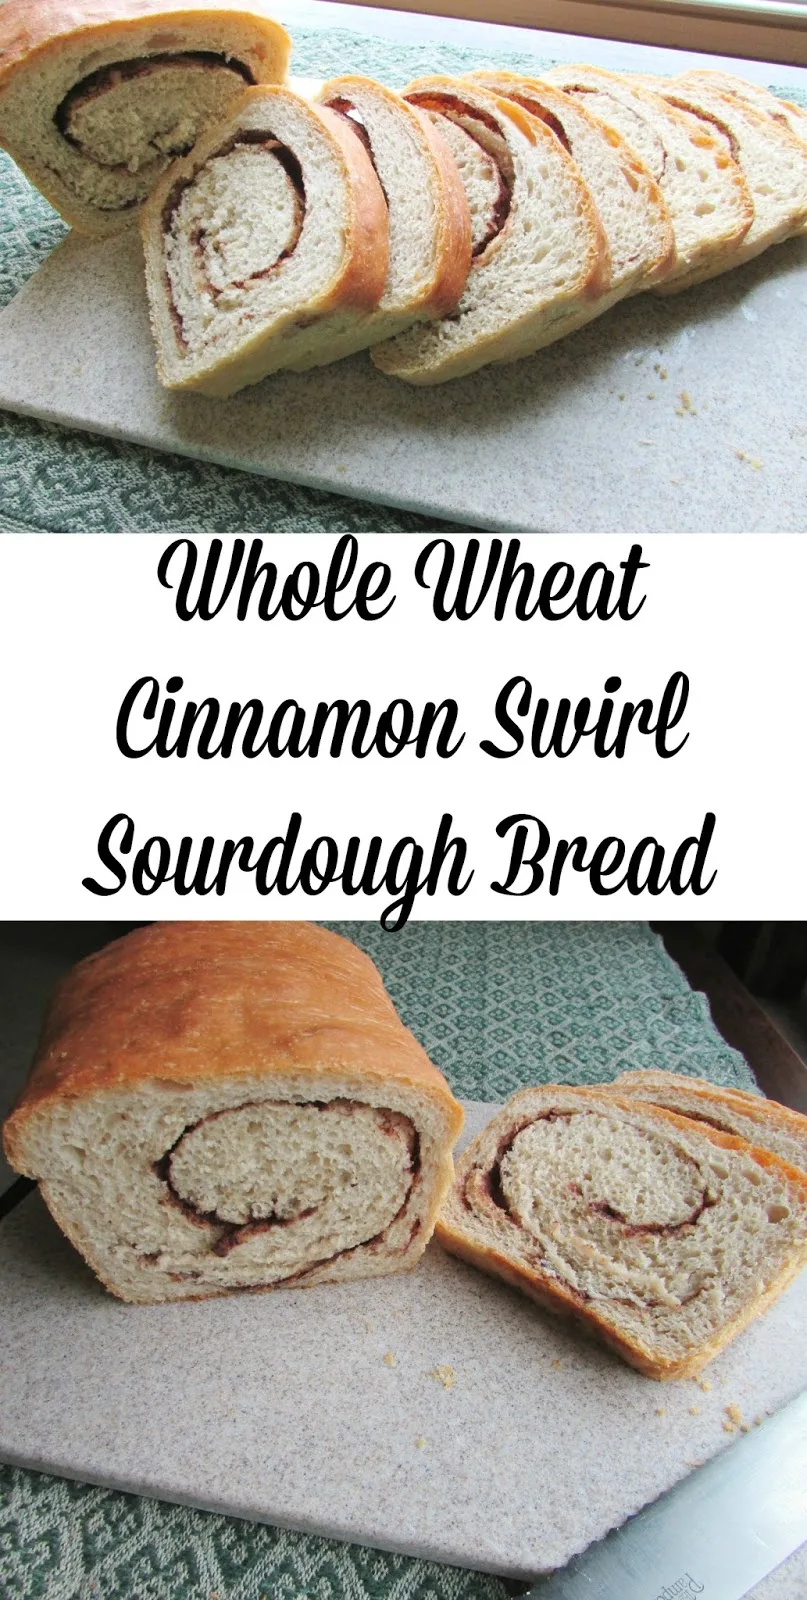 Soft sourdough sandwich bread with a cinnamon sugar swirl. This bread is perfect for toasting or making into French toast.